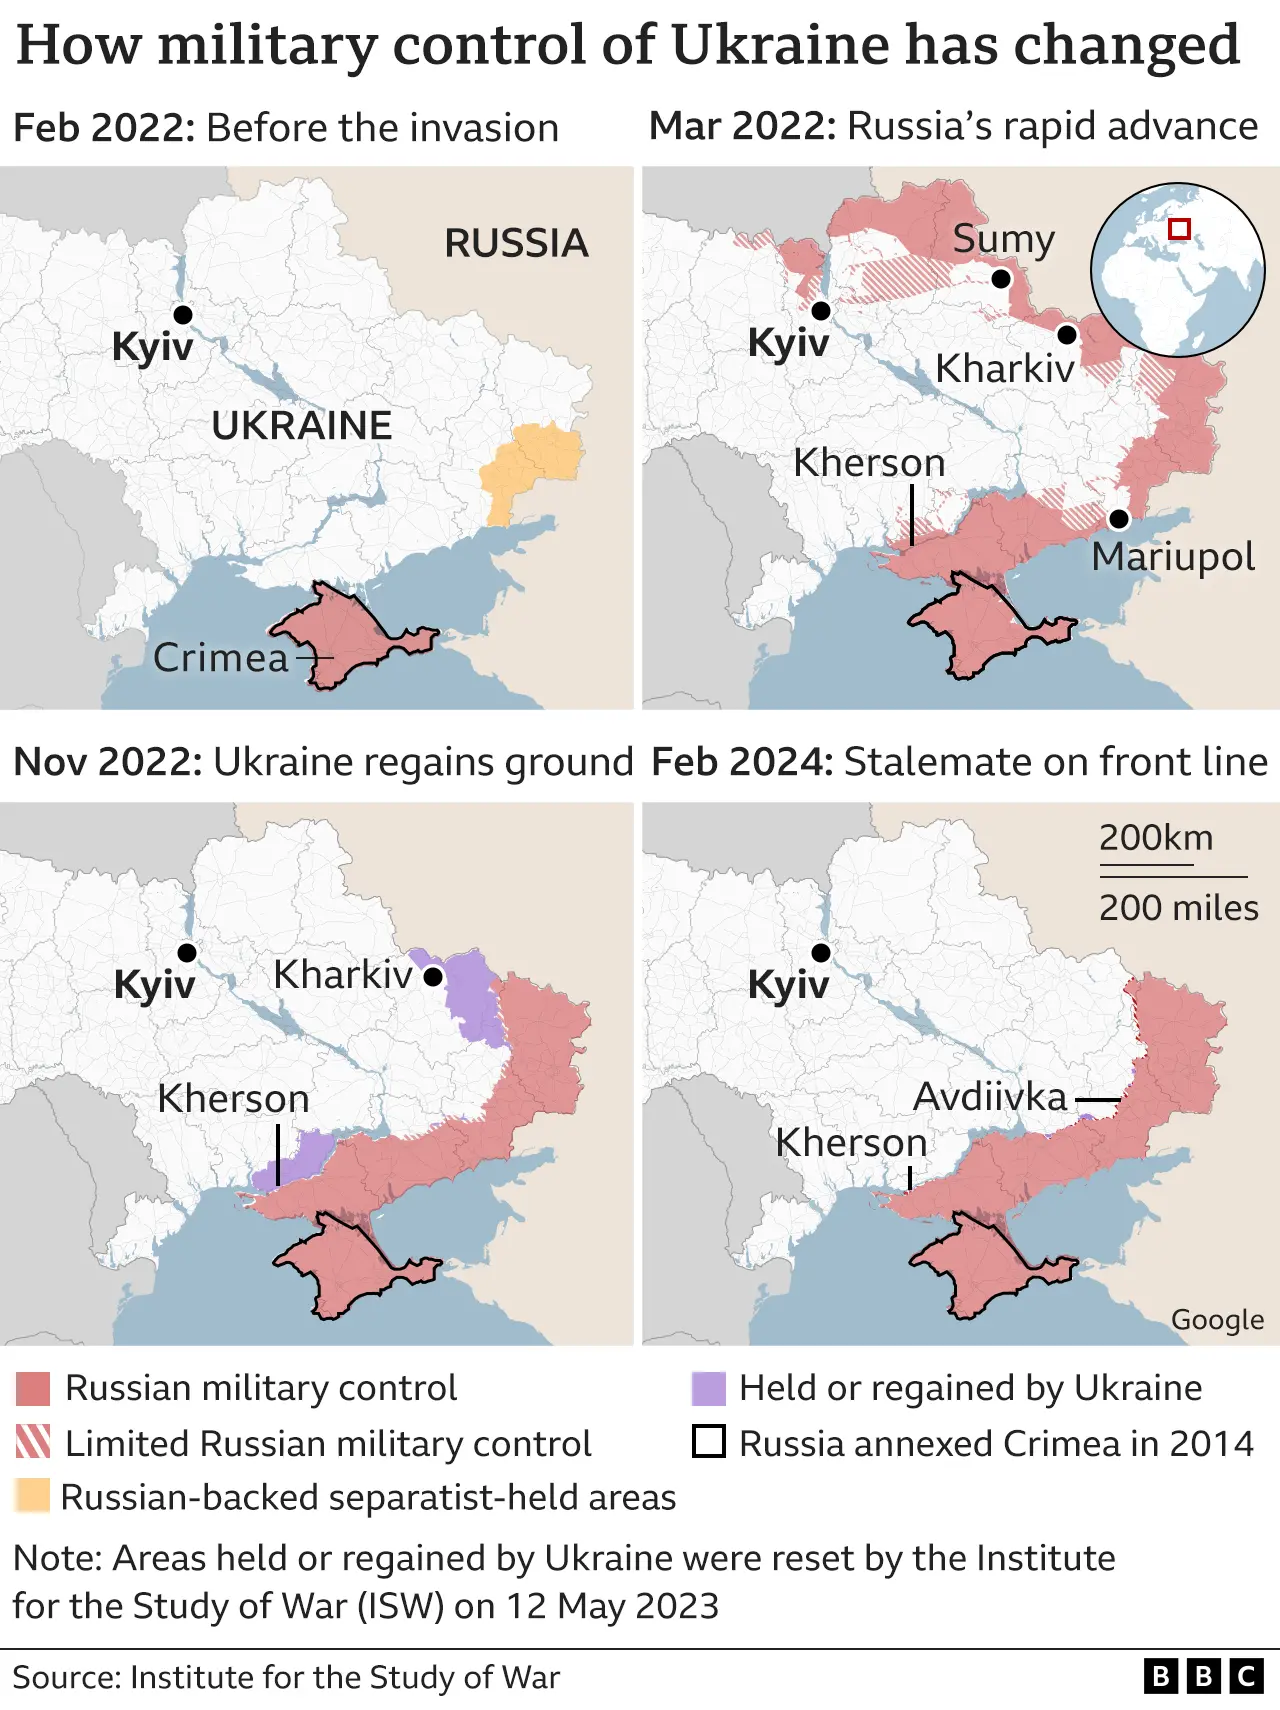 BBC shows the stalemate on the Ukrainian front.